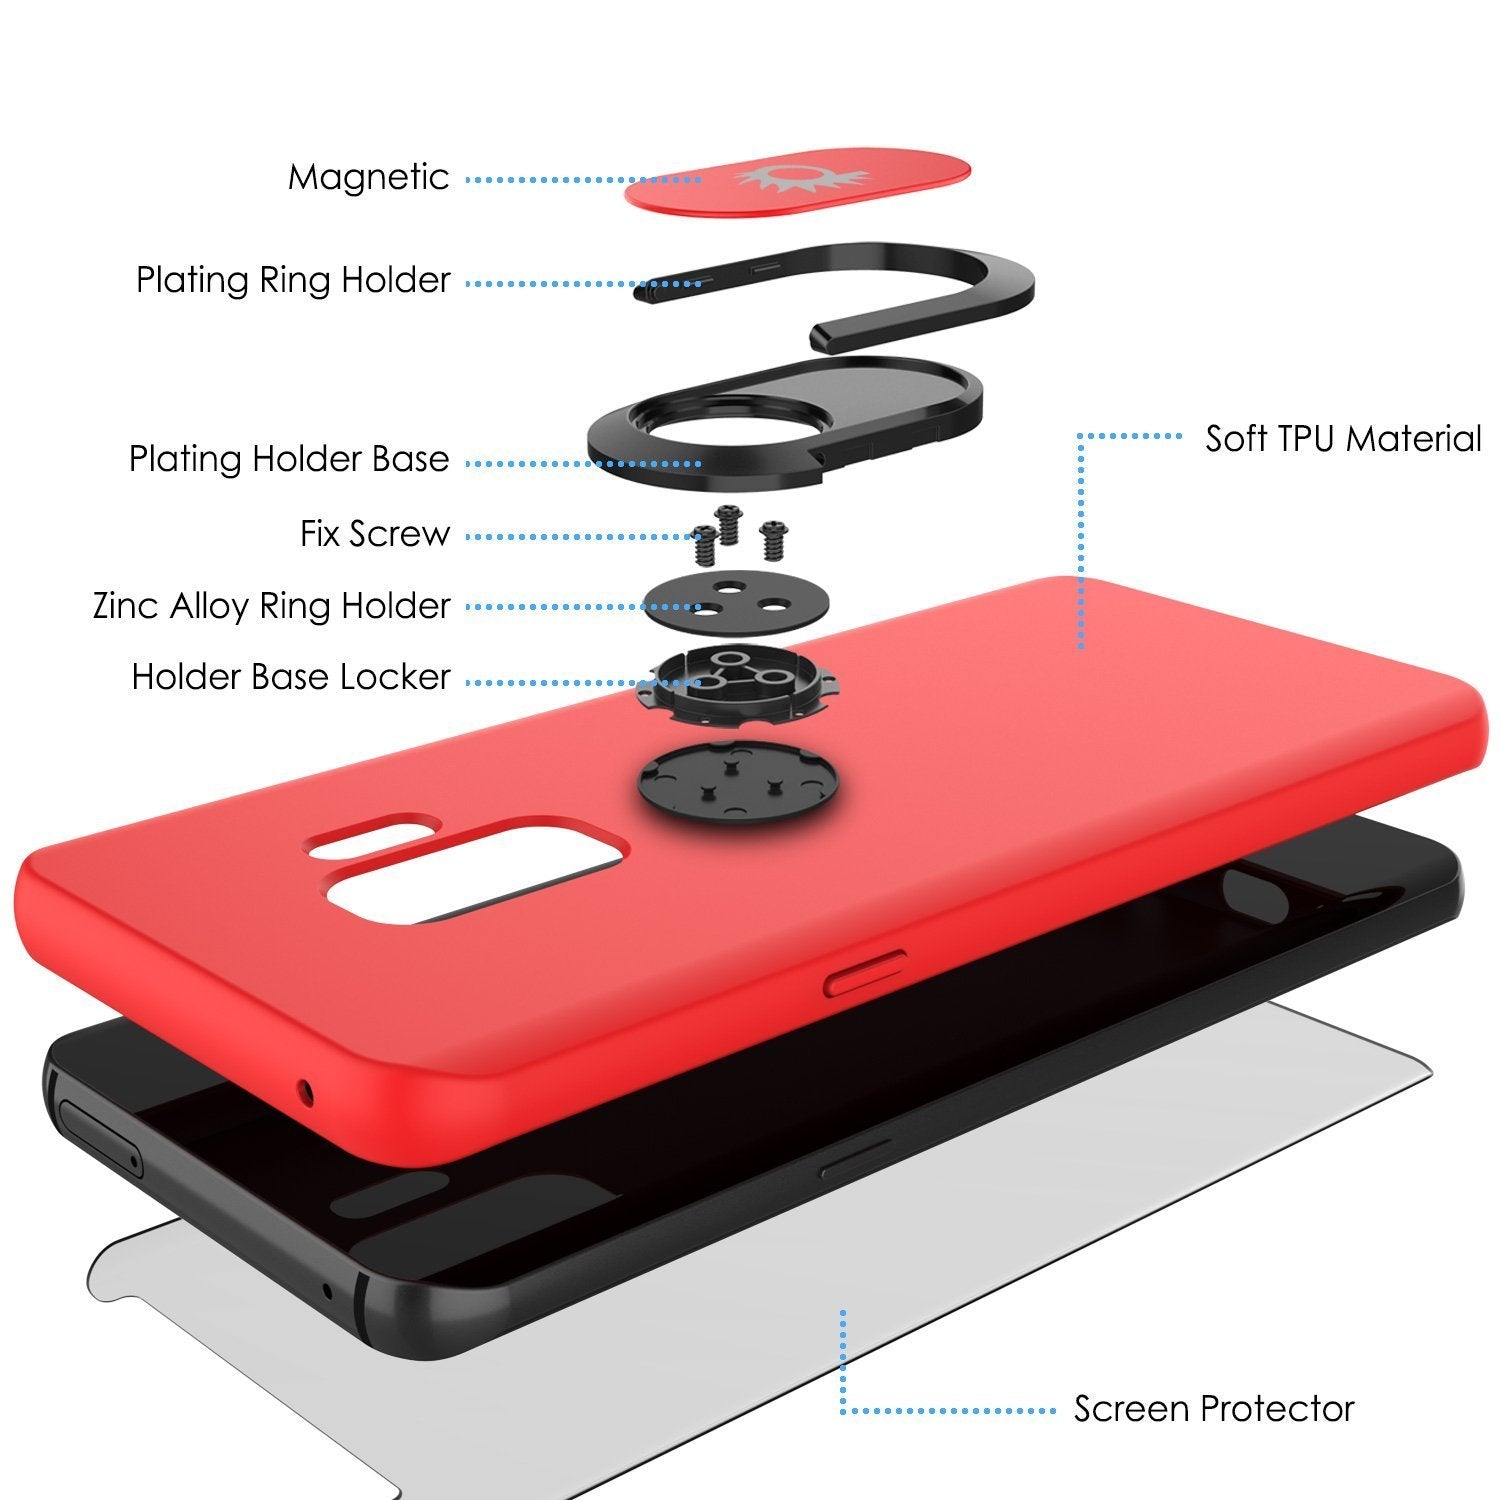 Galaxy S9 PLUS, Punkcase Magnetix Protective TPU Cover W/ Kickstand, Ring Grip Holder & Metal Plate for Magnetic Car Phone Mount PLUS PunkShield Screen Protector for Samsung S9+ Edge [Red]